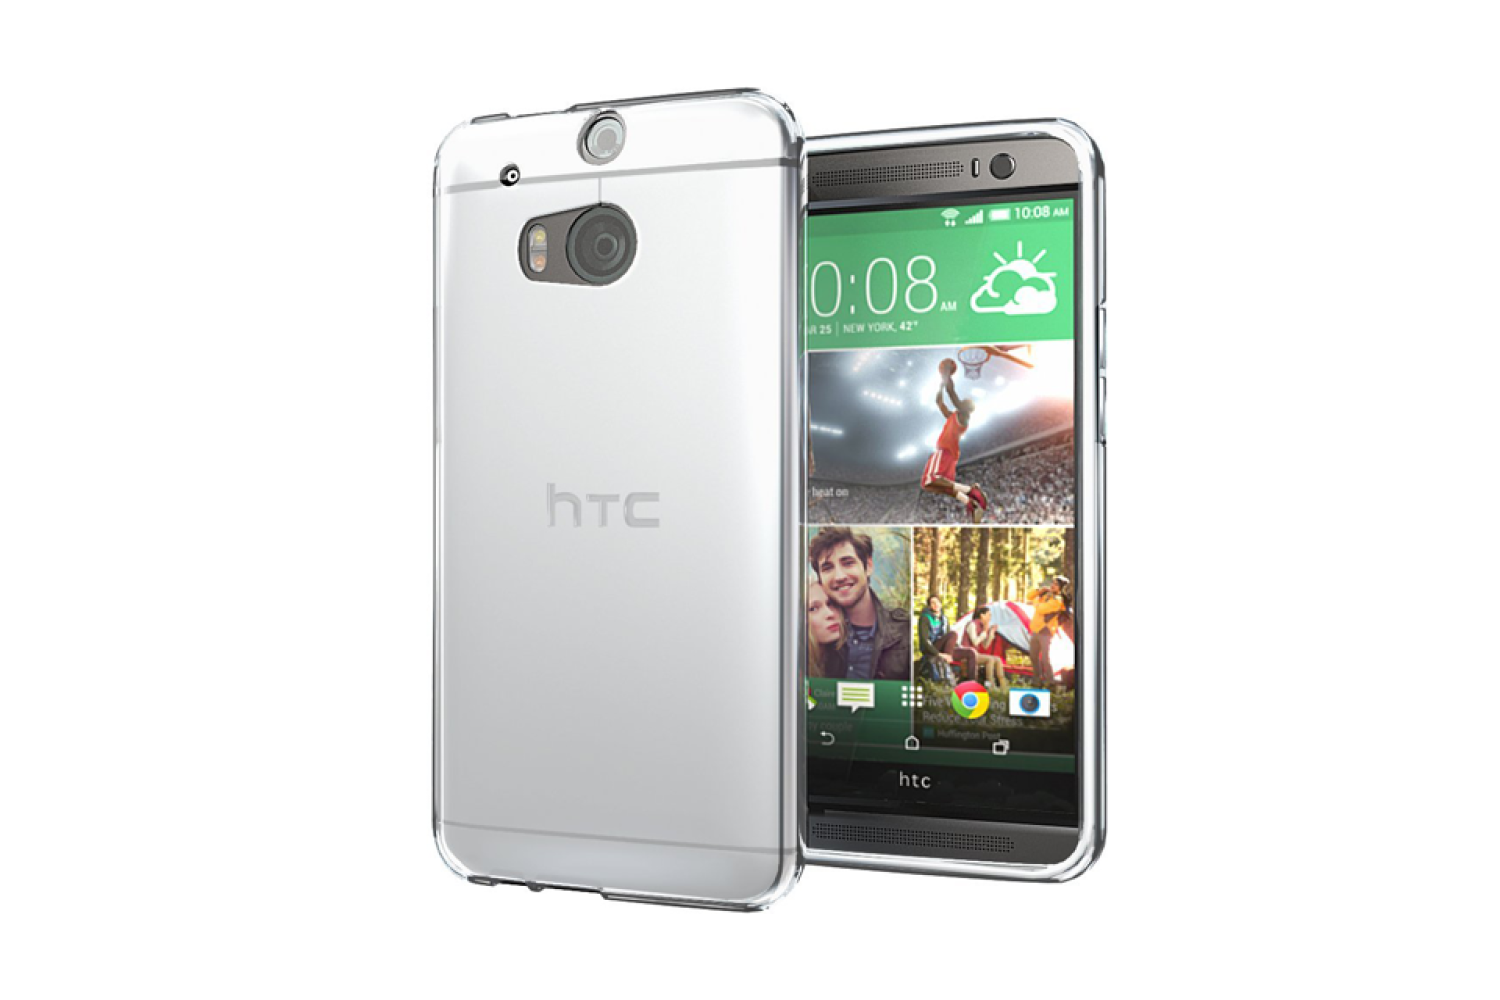 maag Tanzania wakker worden 20 Best HTC One M8 Cases and Covers | Digital Trends